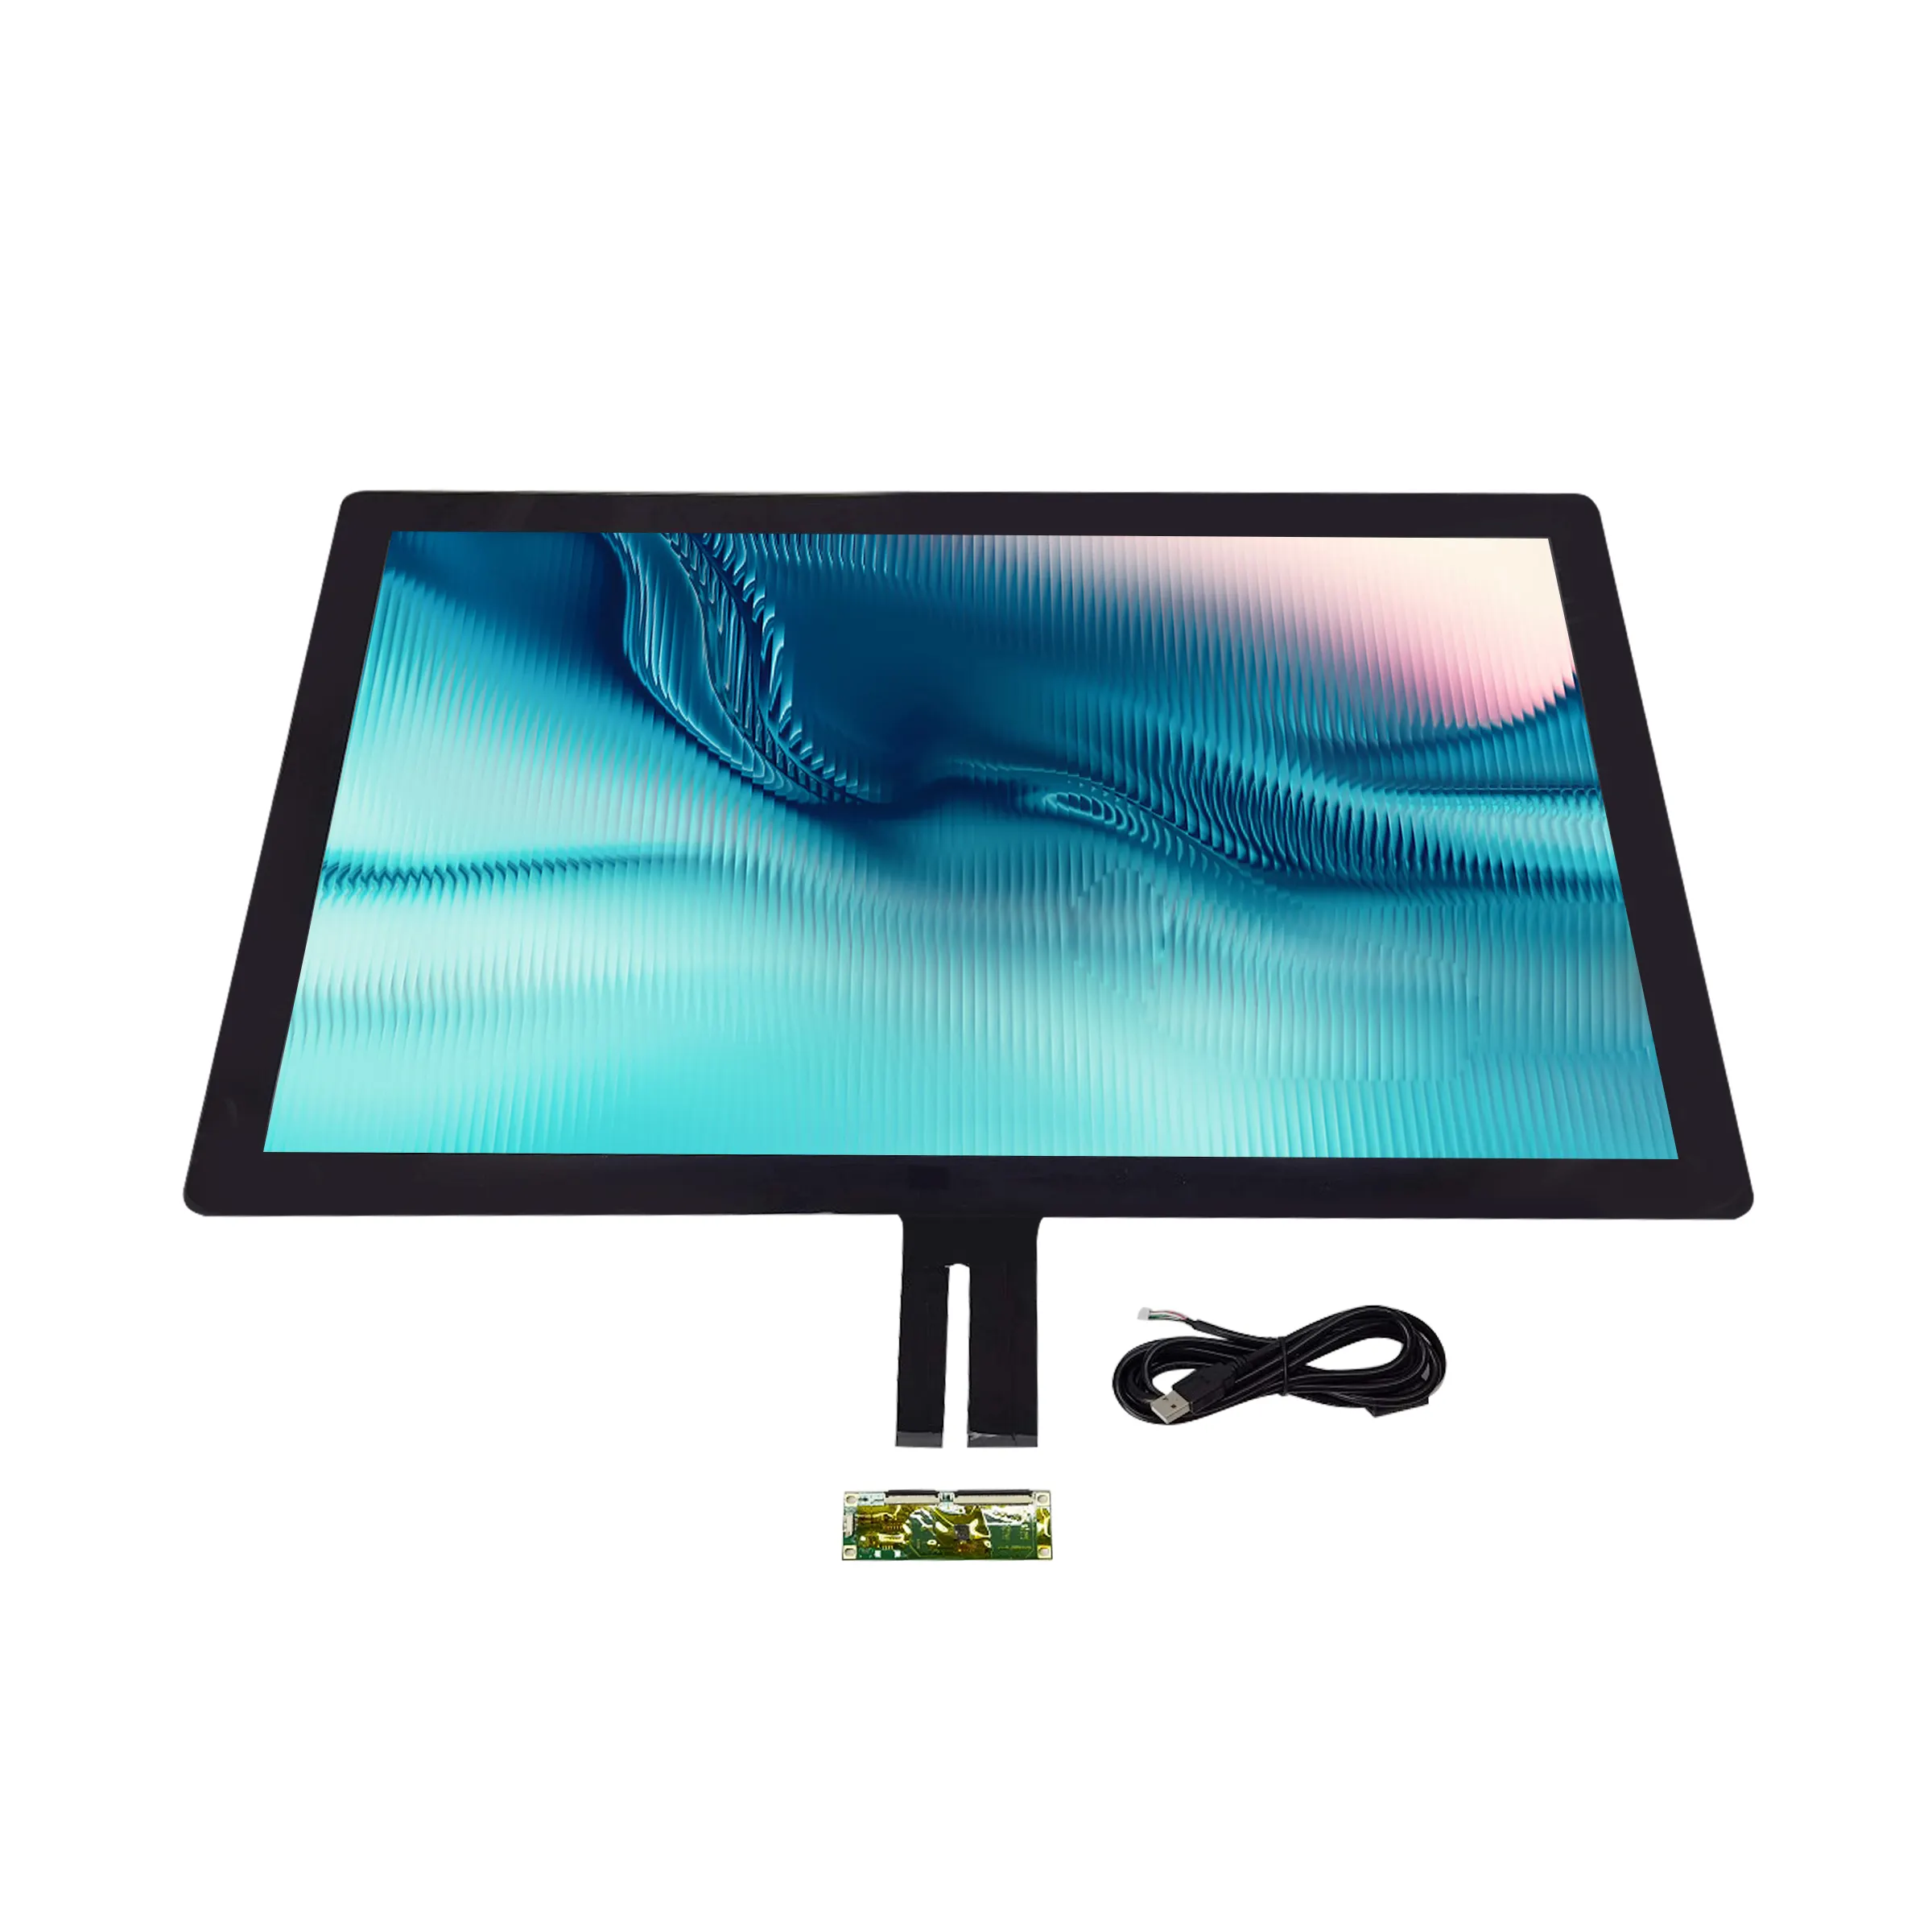 32-Inch Black Touchscreen PCAP Capacitive Touch Screen Overlay for Business with USB Interface